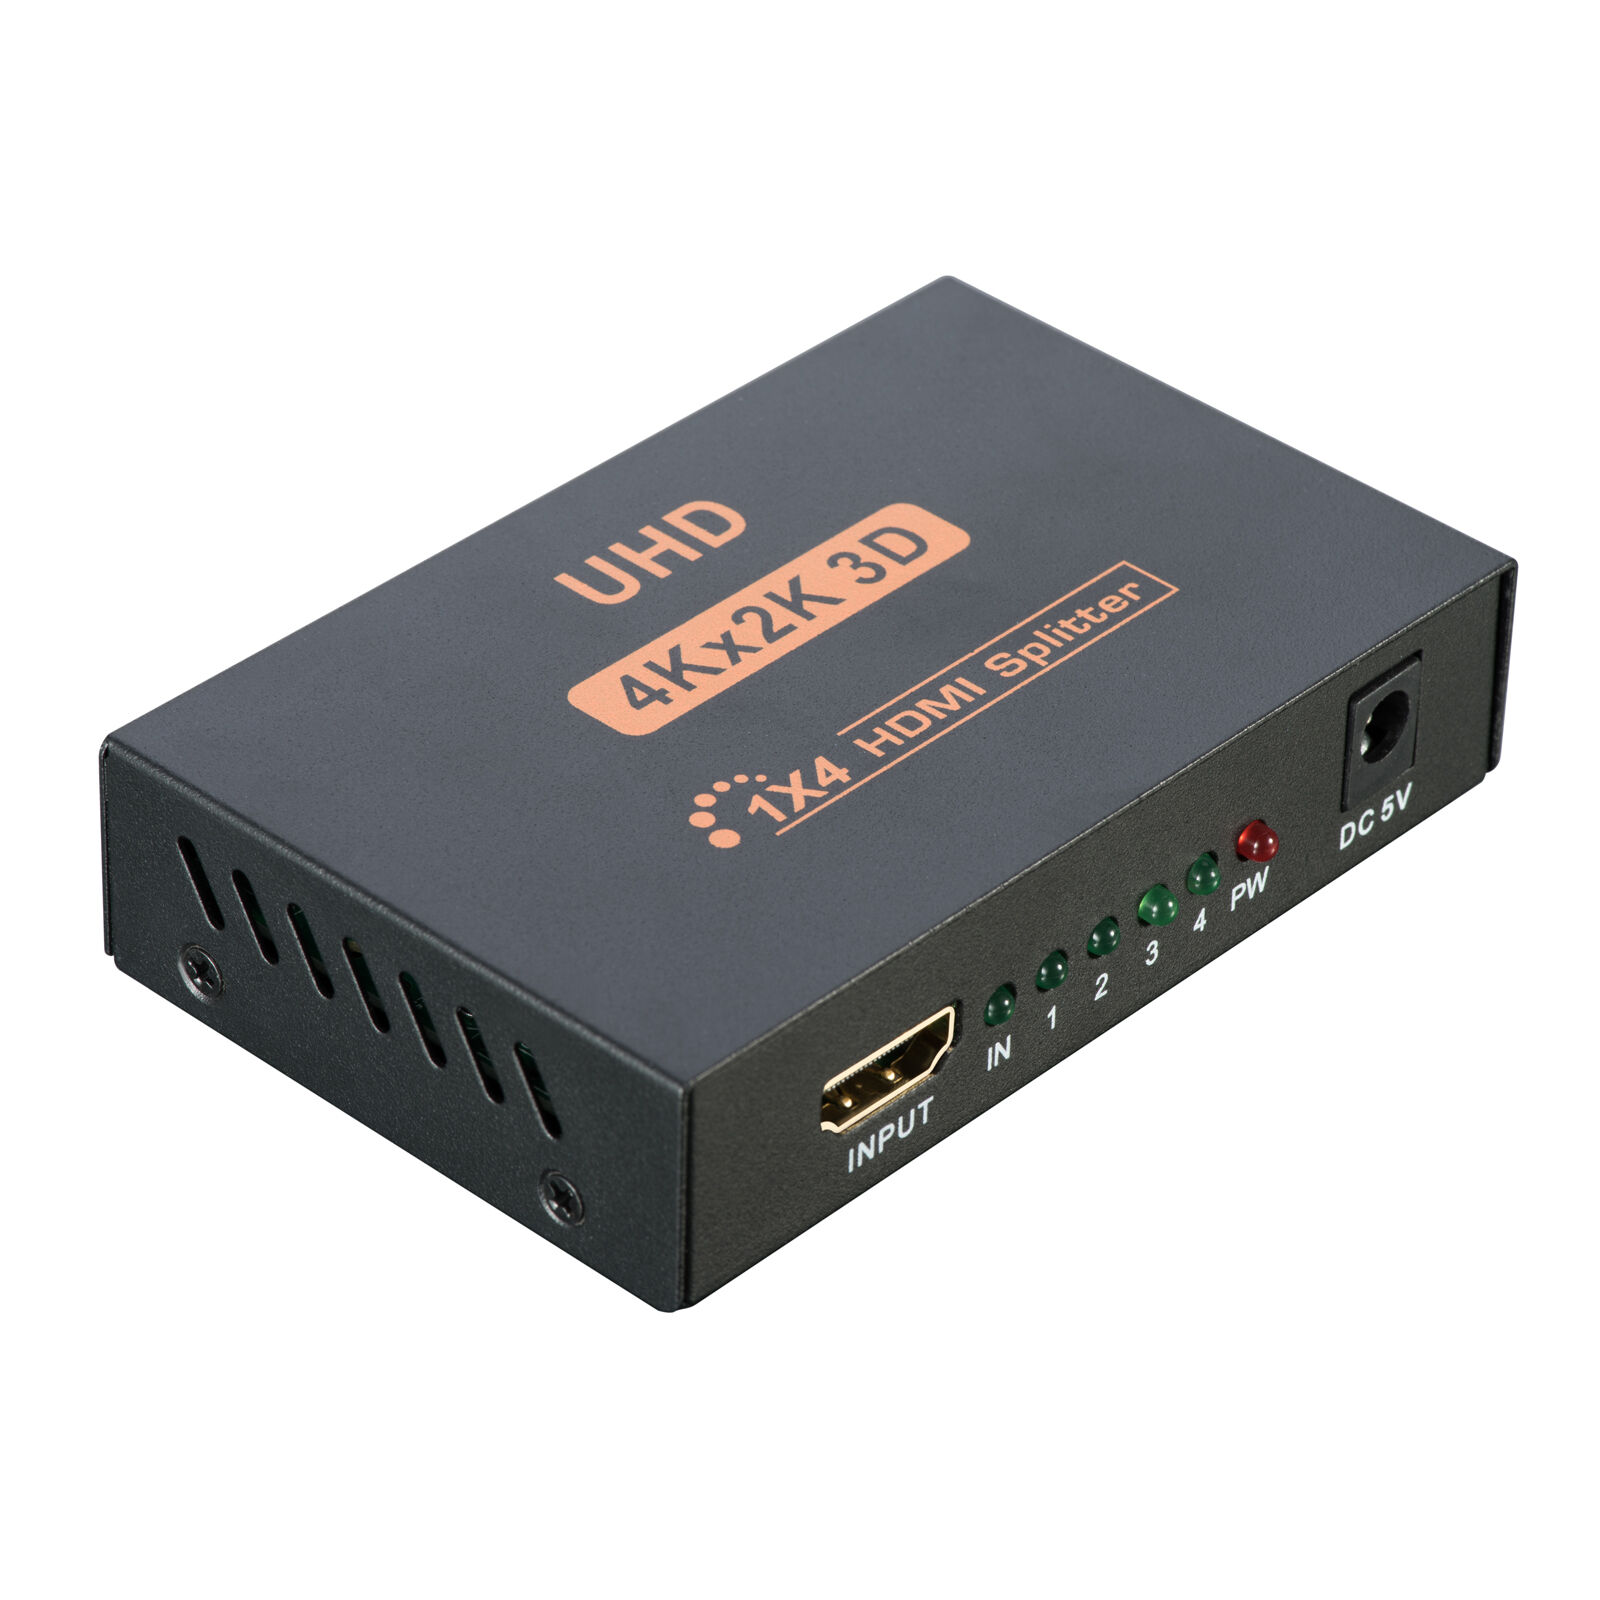 Ultra HD 4K 4 Port HDMI Splitter 1x4 Repeater Amplifier 1080P 3D Hub 1 In 4 Out Unbranded NOT SPECIFIED - фотография #2